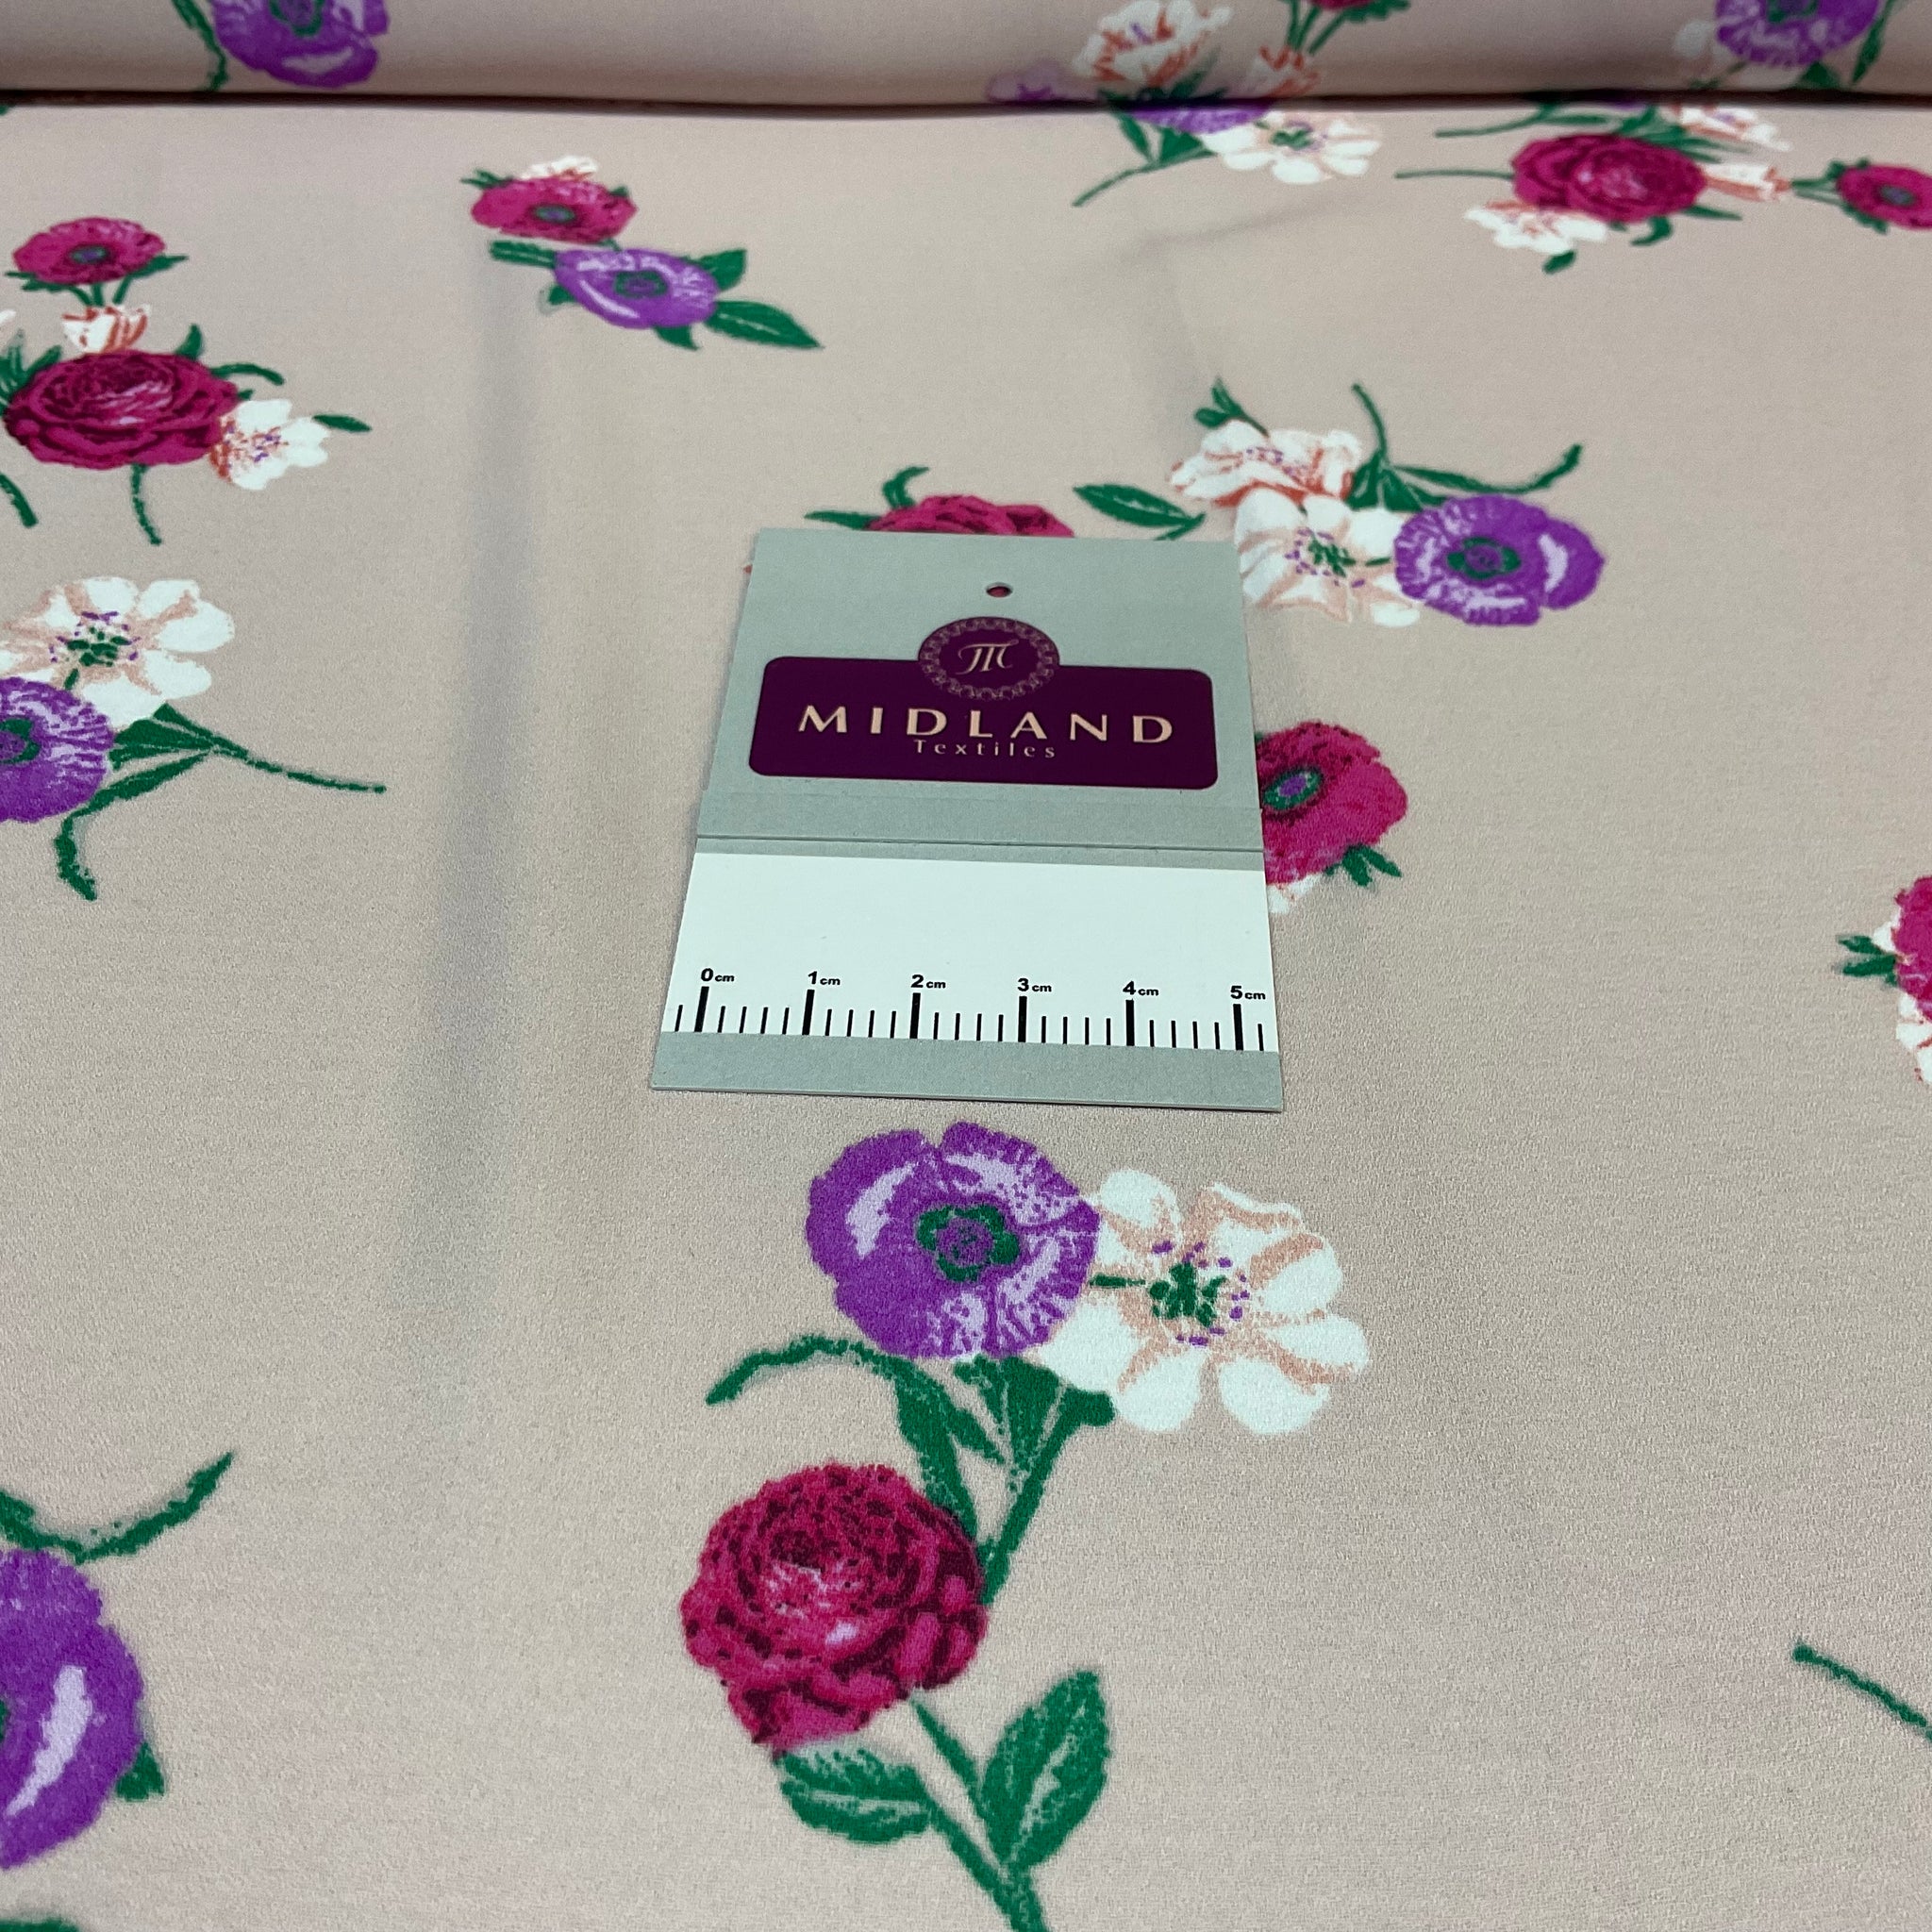 Baby Pink Floral Dress Fabric Georgette Crepe Flowy Fabric 145cm Wide M1400-44